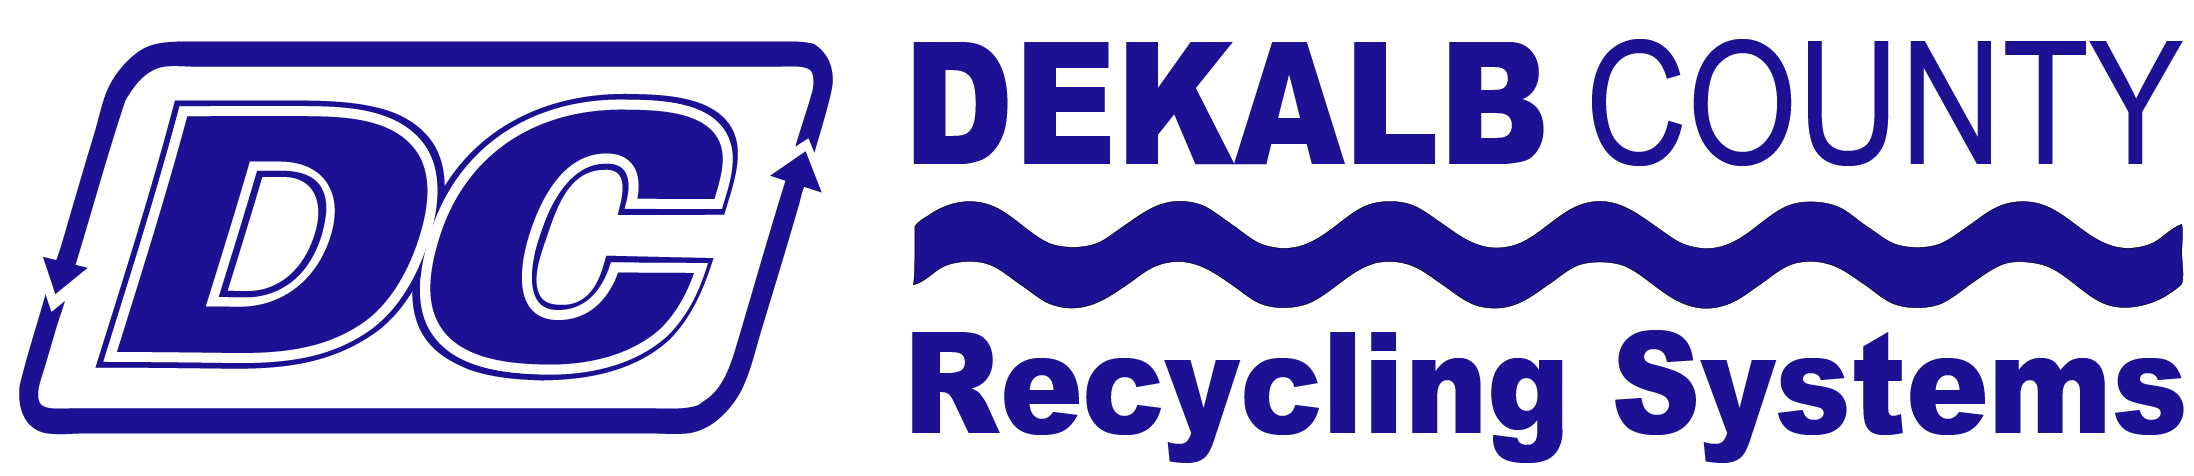 DC DeKalb County Recycling Systems.